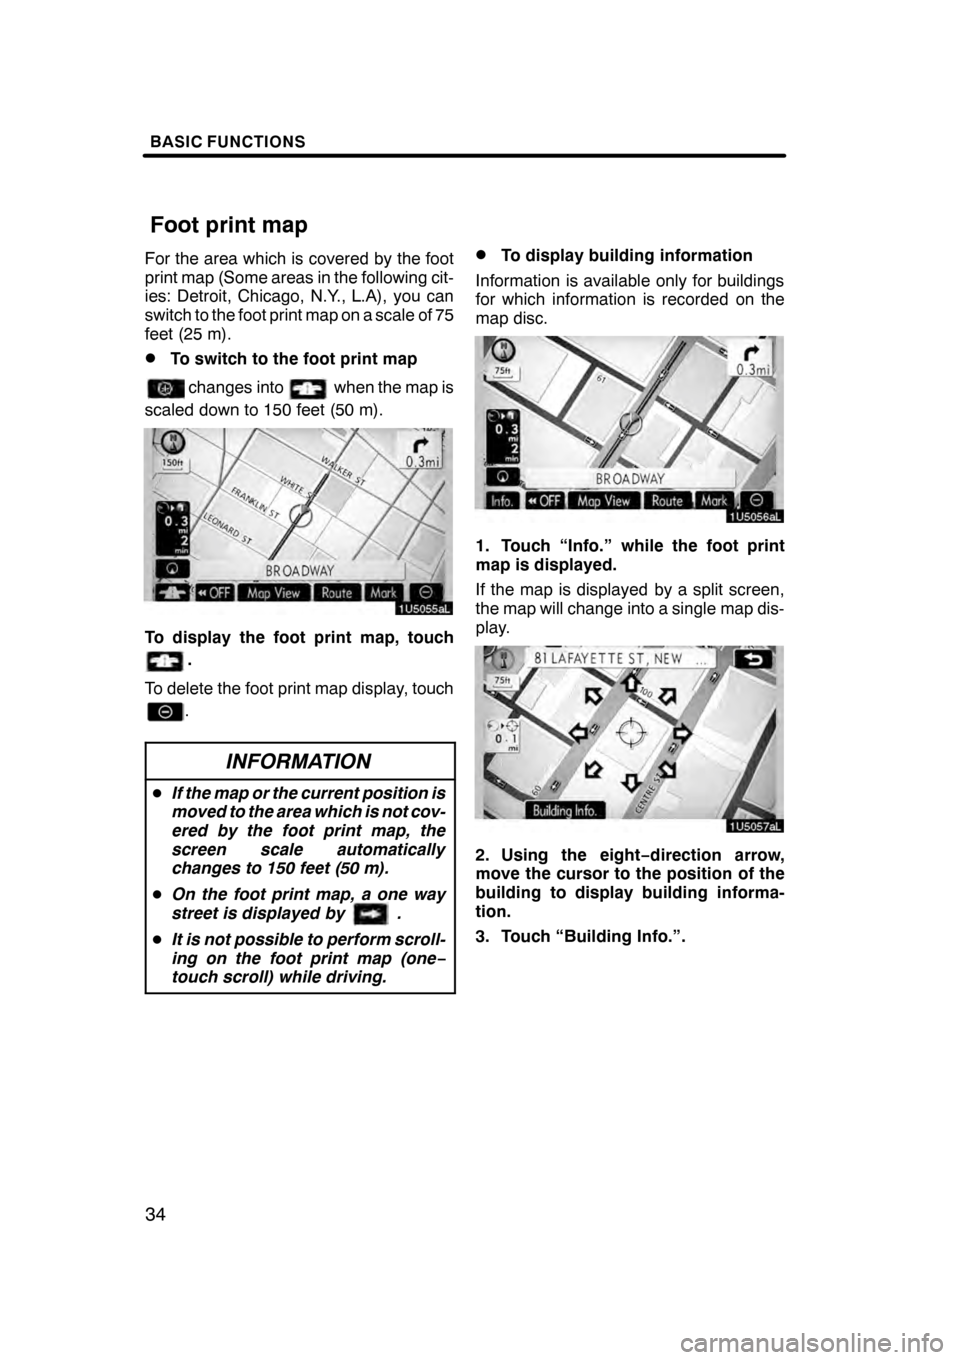 Lexus GS350 2008  Navigation Manual BASIC FUNCTIONS
34
For the area which is covered by the foot
print map (Some areas in the following cit-
ies: Detroit, Chicago, N.Y., L.A), you can
switch to the foot print map on a scale of 75
feet (